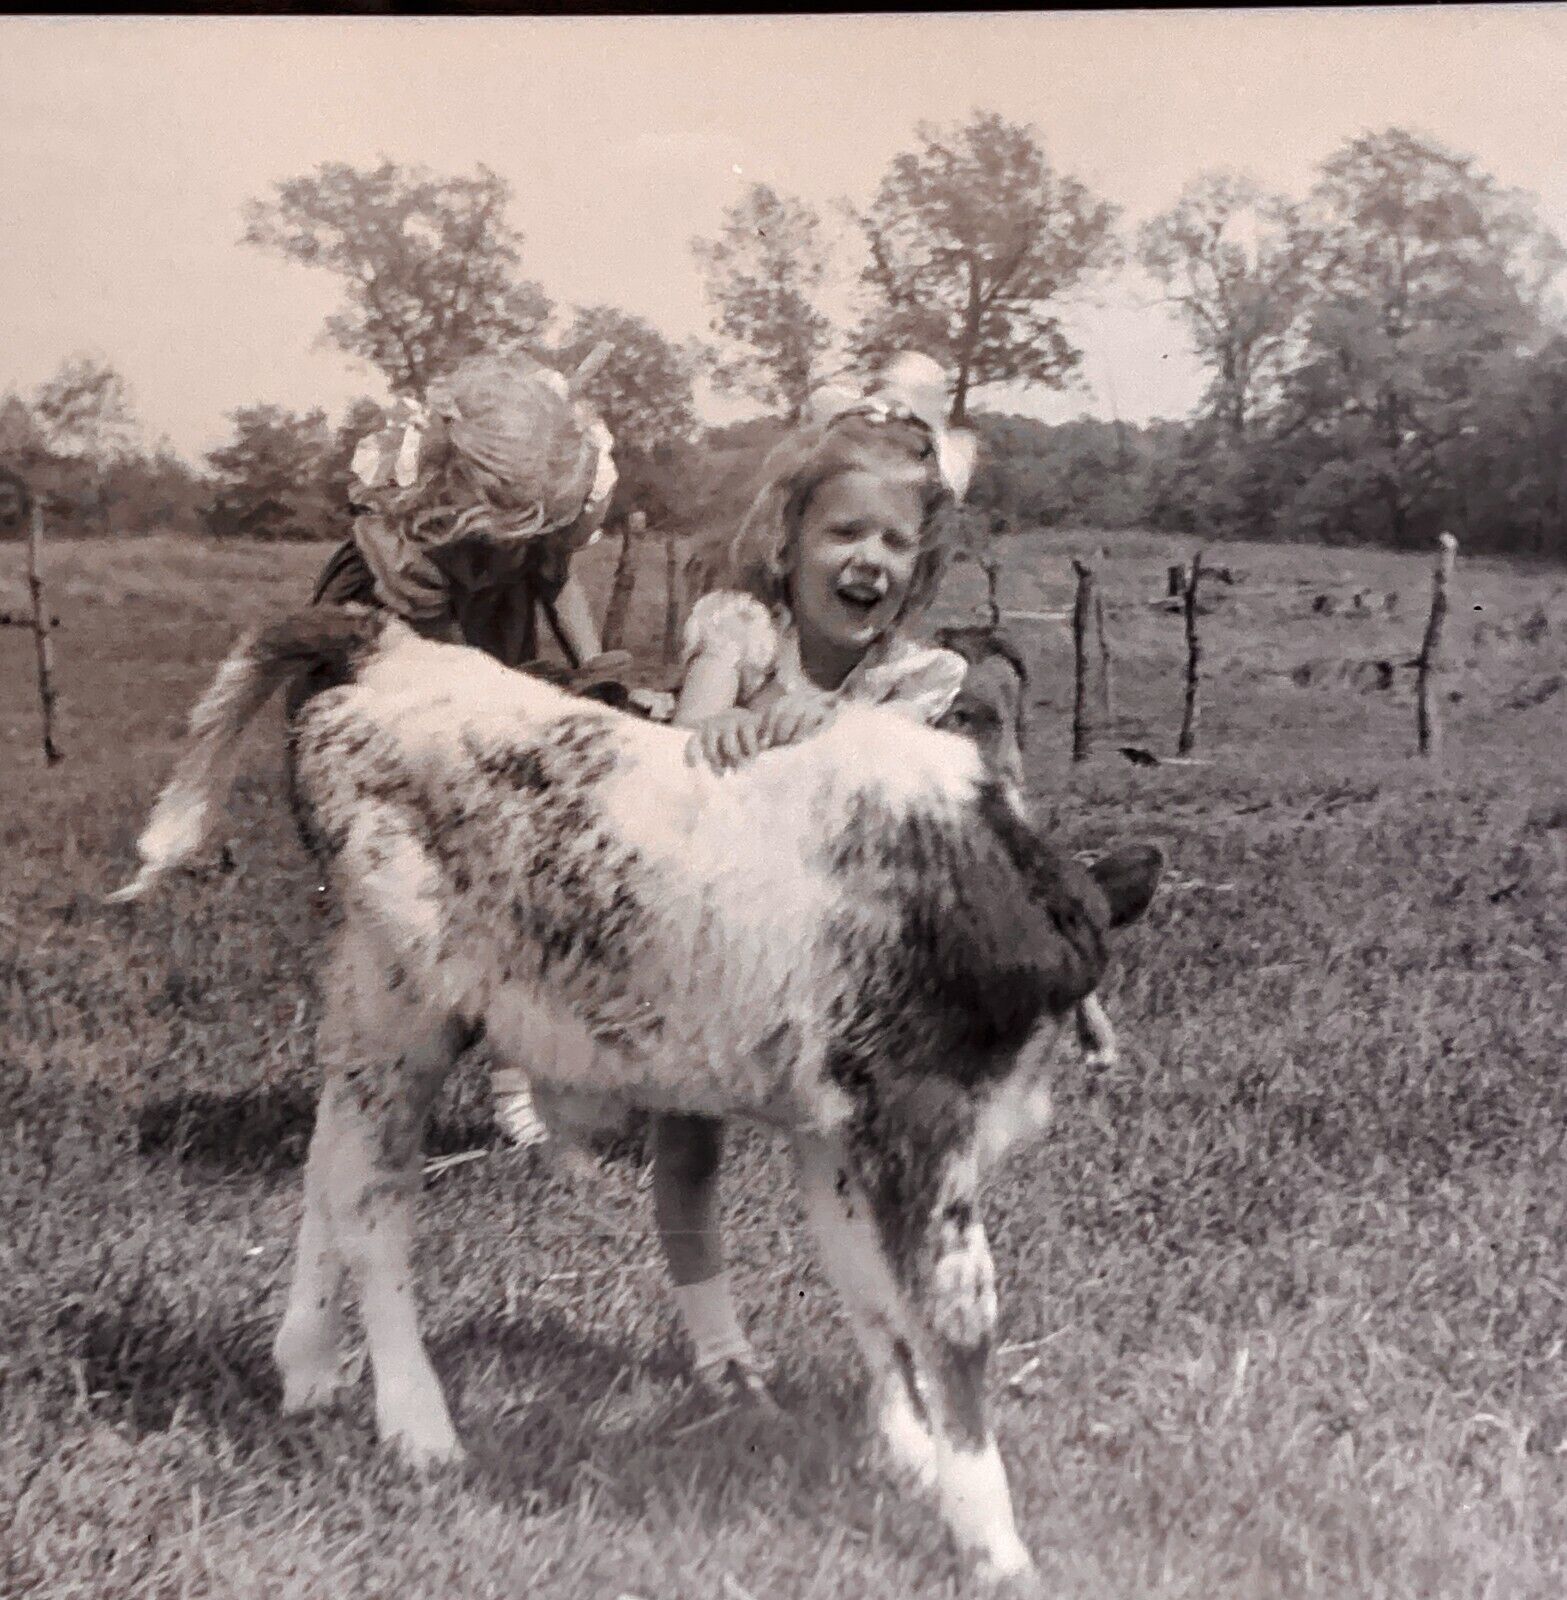 Vintage Negative Cute Little Girls Playing with Calf Field Rural Farm Med Format